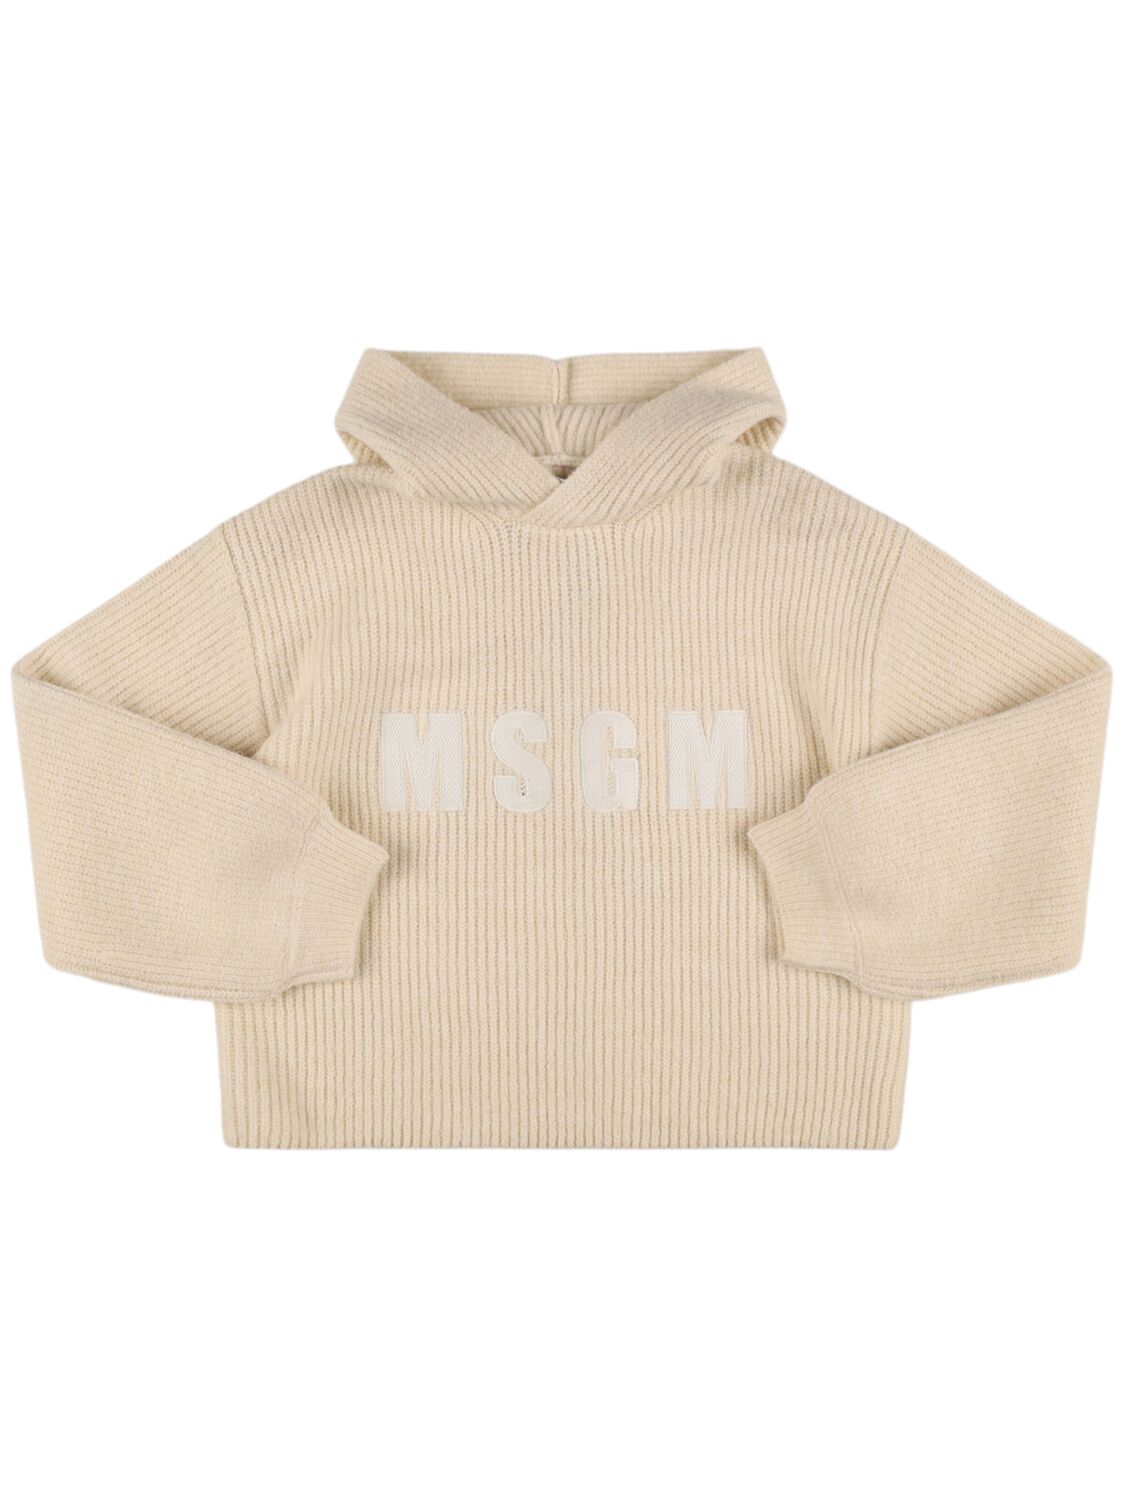 Msgm Wool Blend Knit Hooded Sweater In Neutral